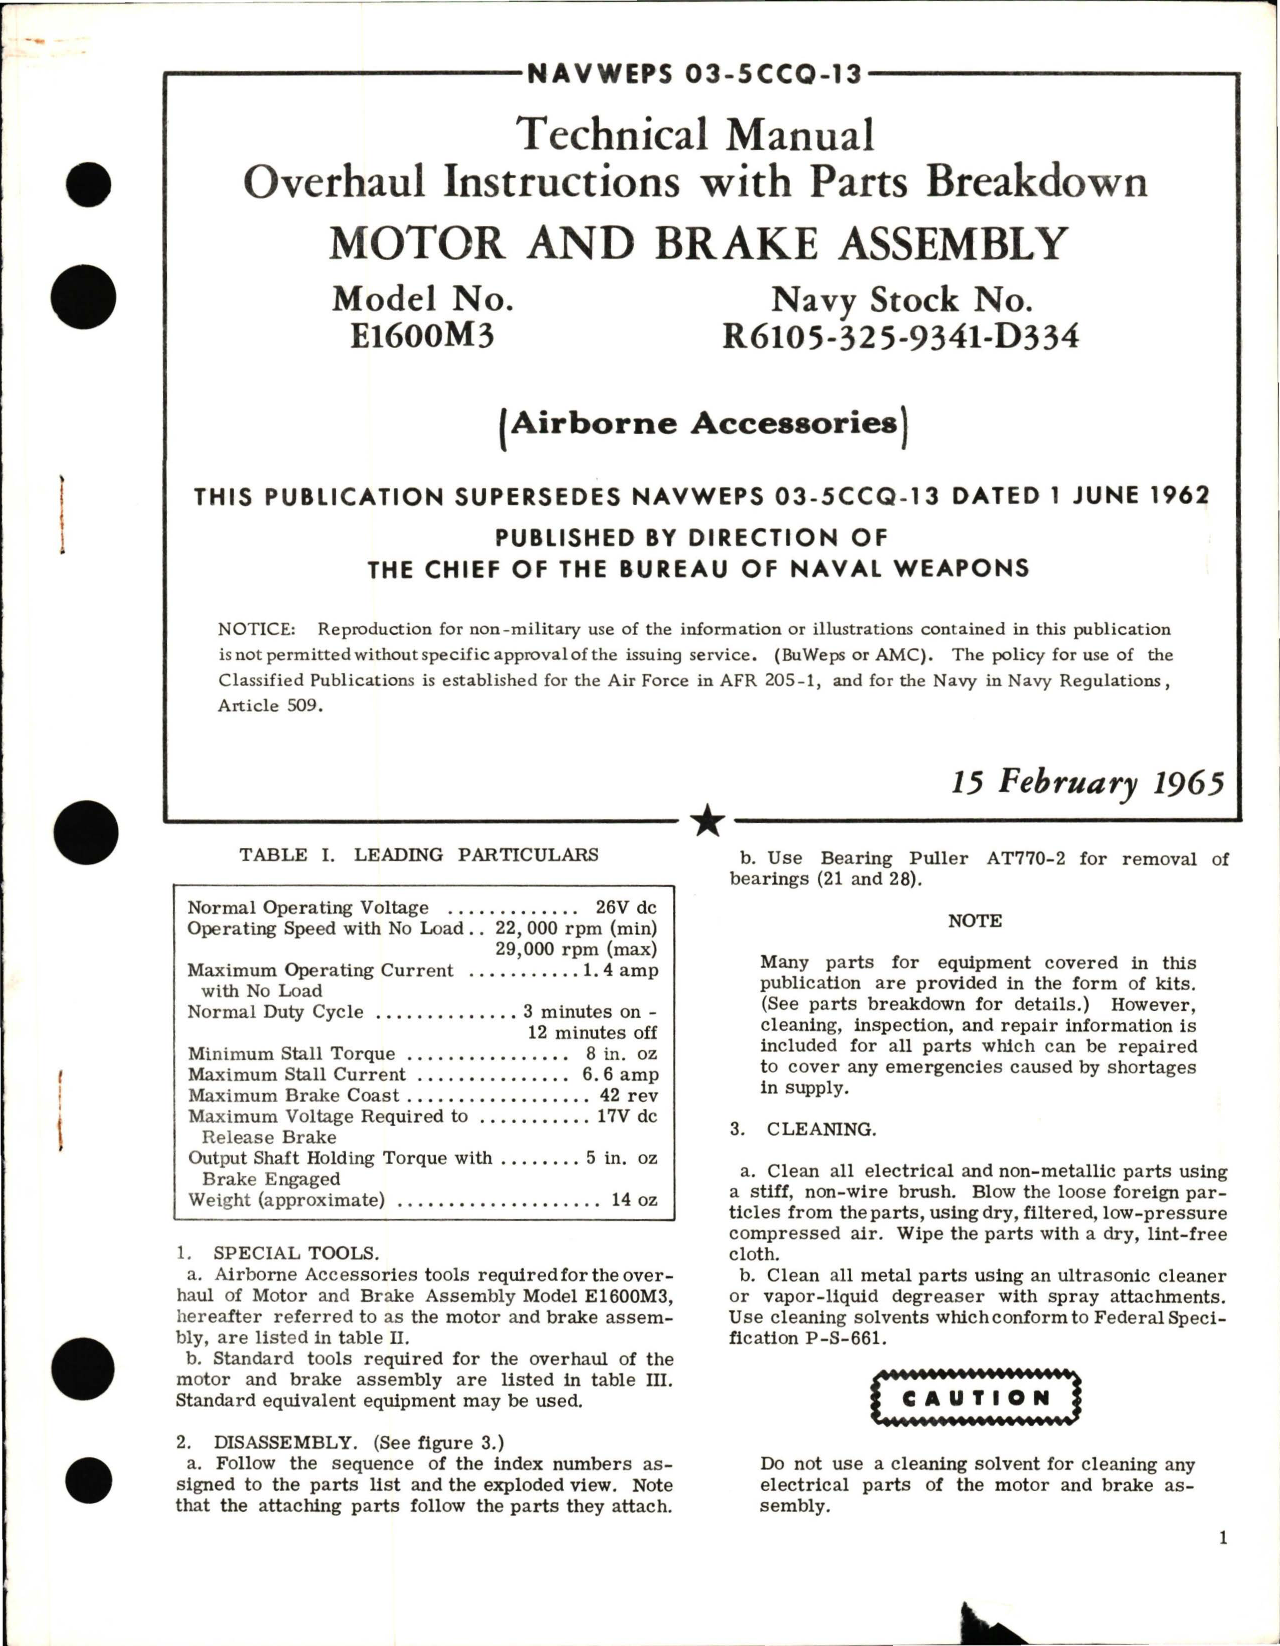 Sample page 1 from AirCorps Library document: Overhaul Instructions with Parts Breakdown for Motor and Brake Assembly - Model E1600M3